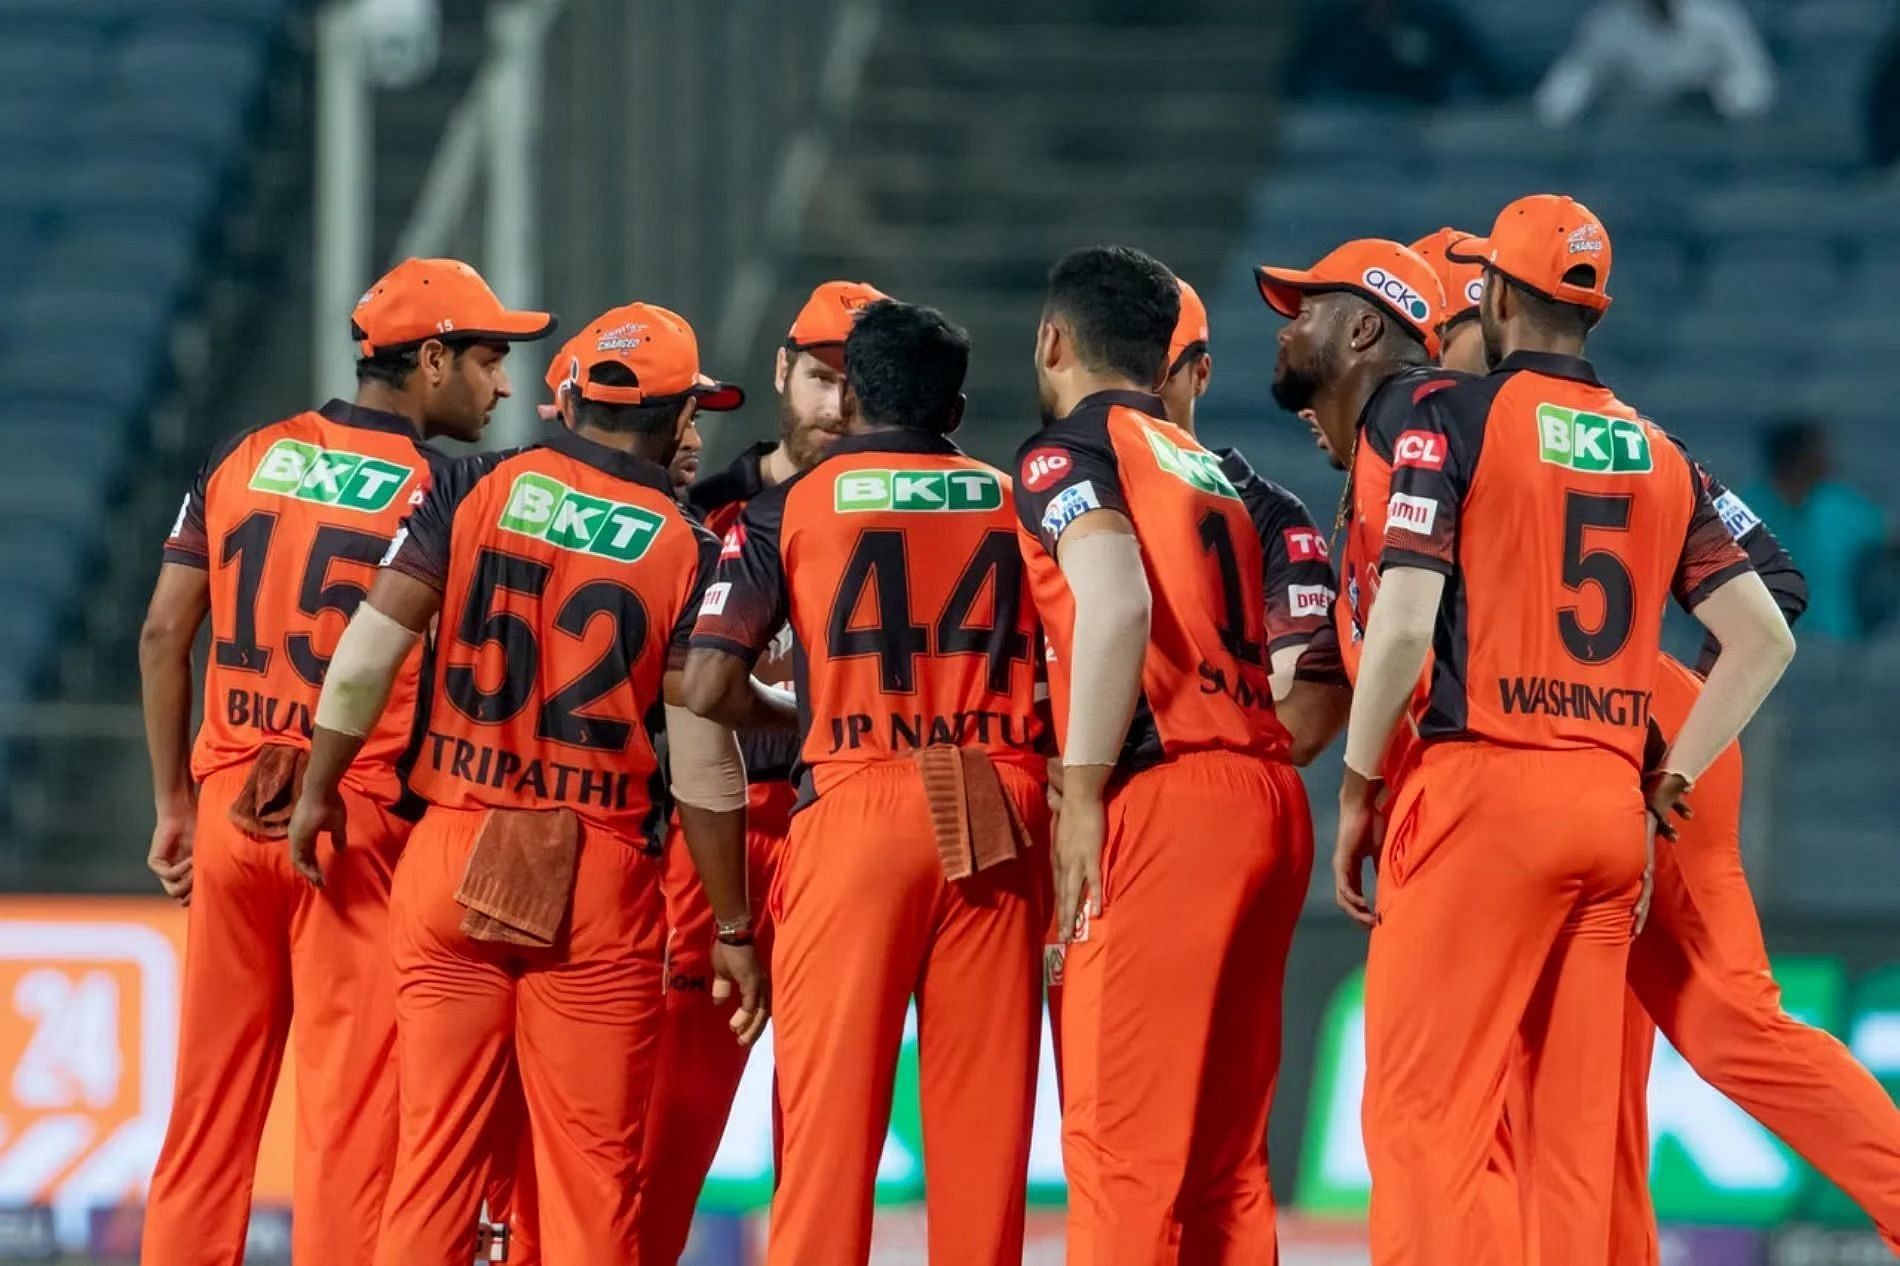 The SunRisers Hyderabad last qualified for the playoffs in IPL 2020. [P/C: iplt20.com]